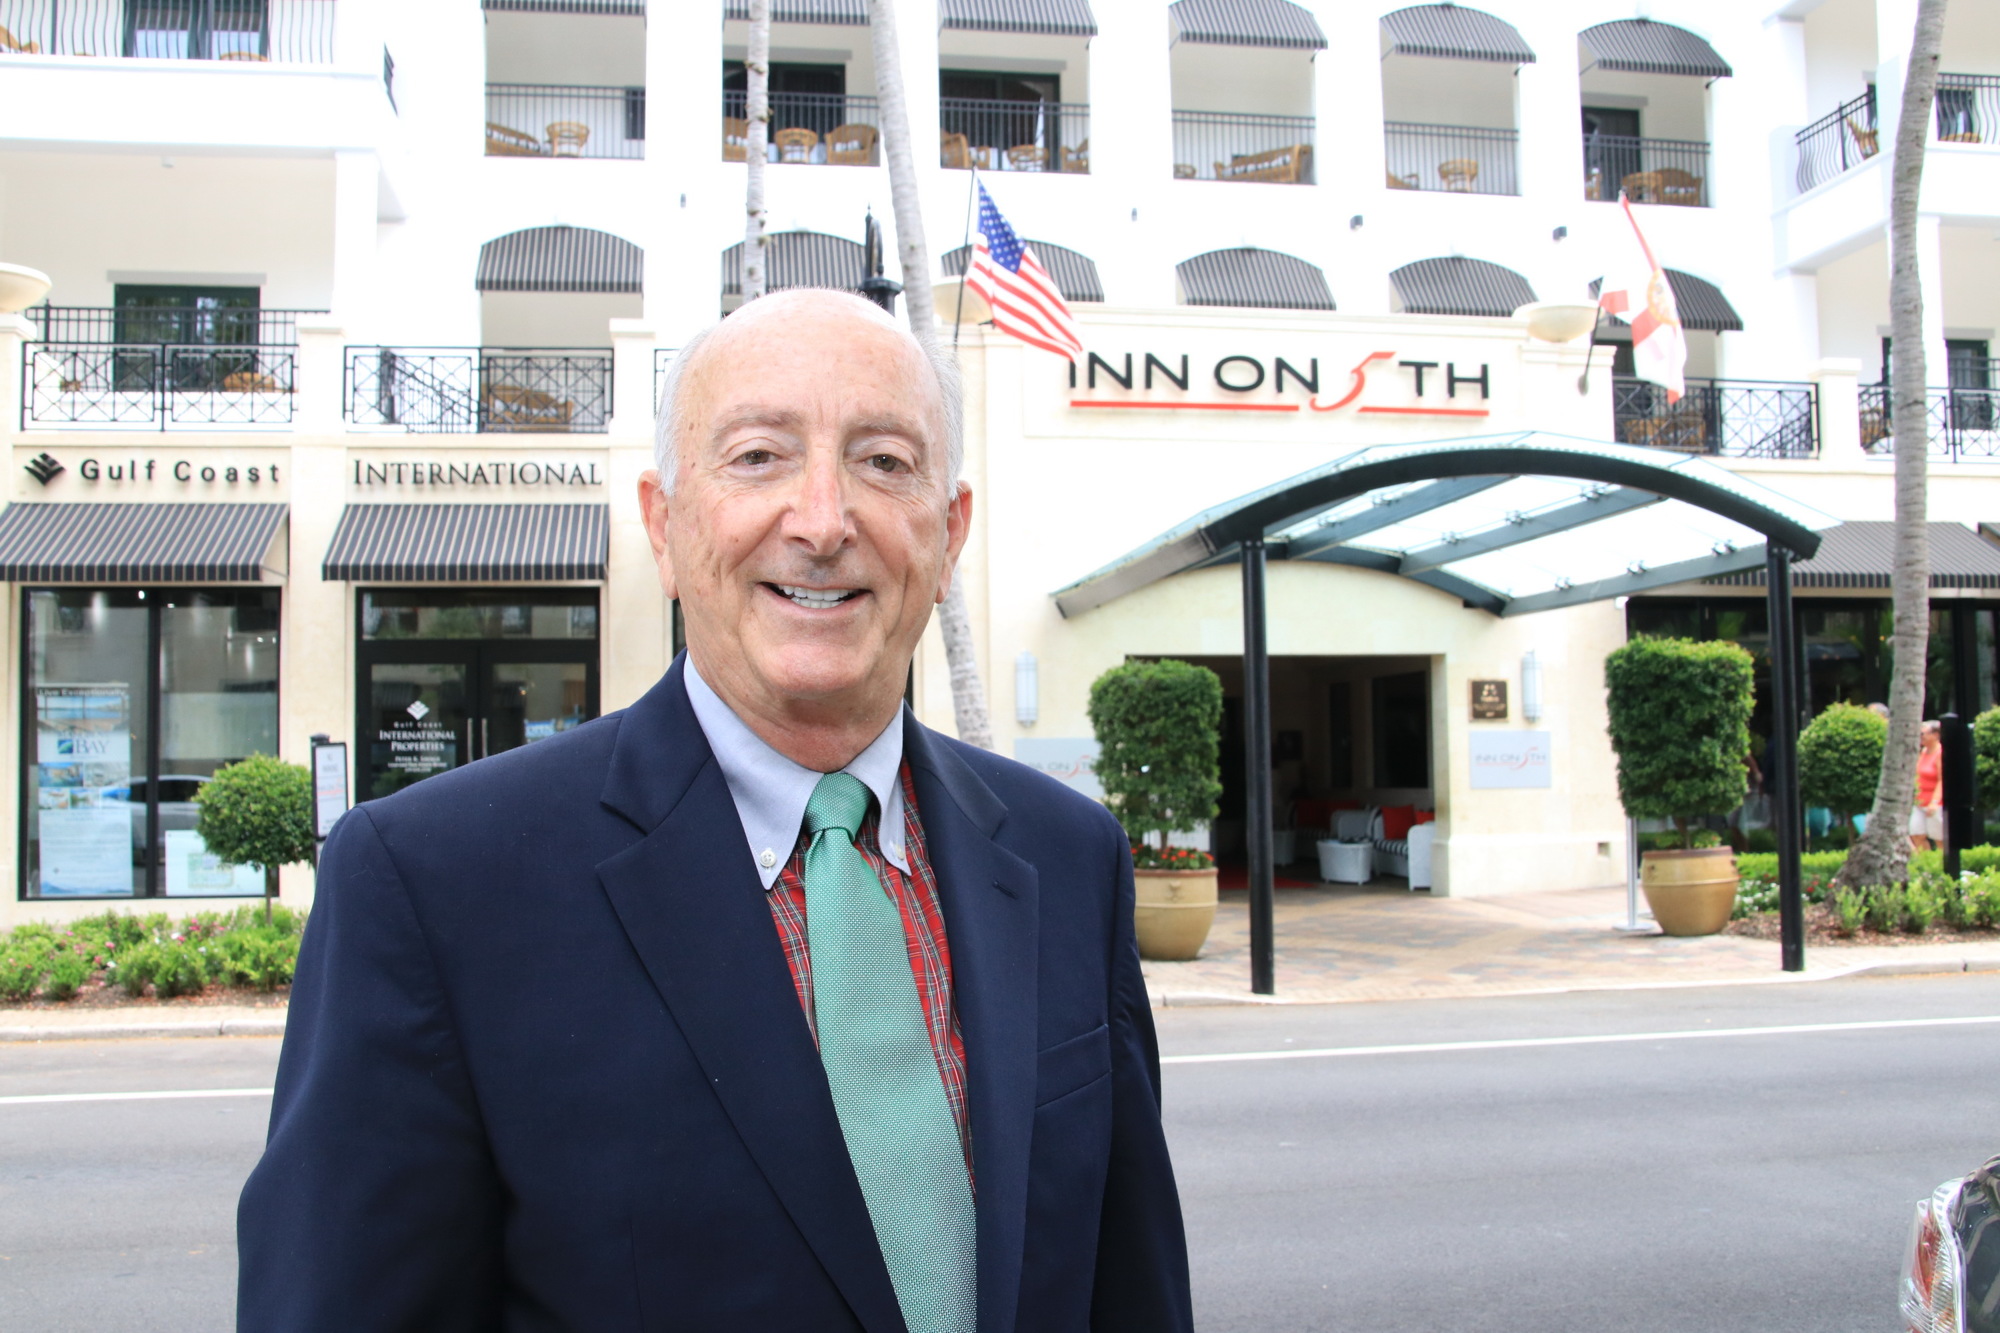 File. Phil McCabe has operated the Inn on Fifth in Naples for 25 years.